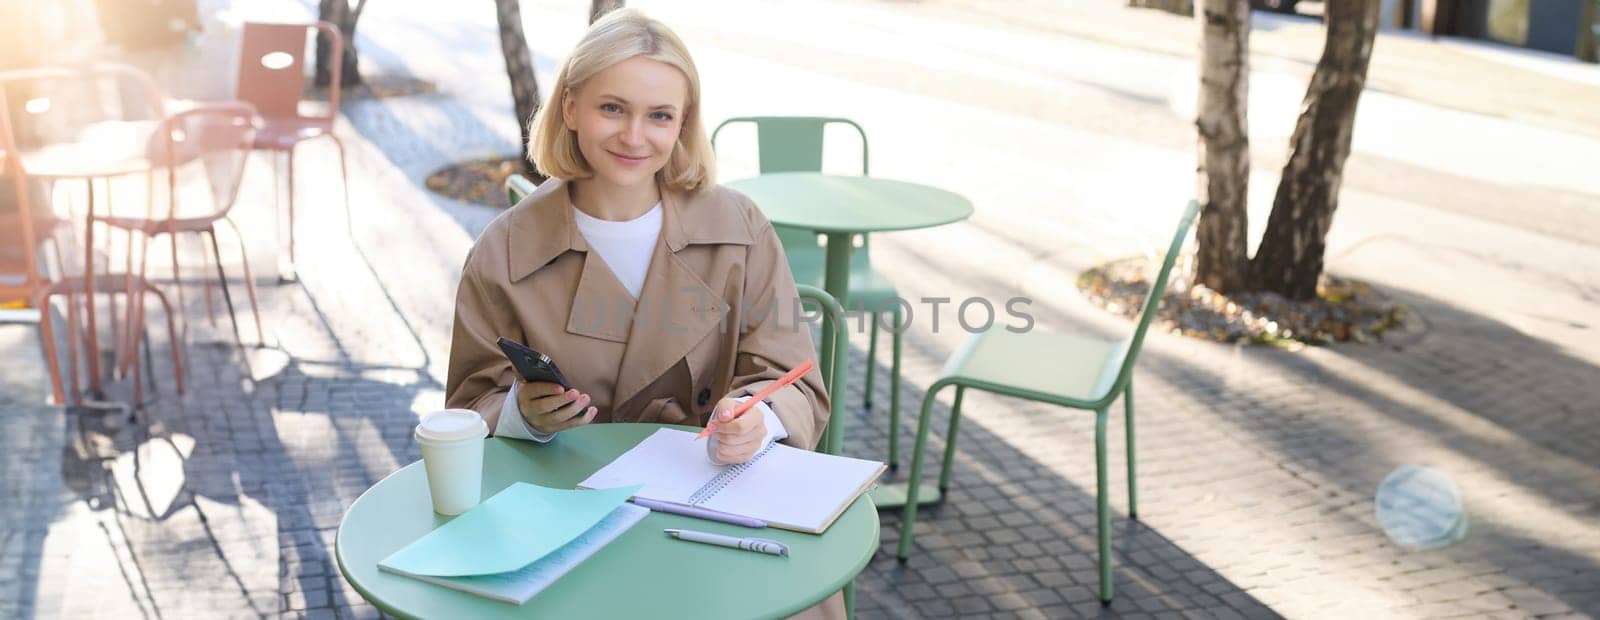 Happy beautiful young woman enjoying the sun outdoors, sitting in city centre cafe, drinking coffee, holding smartphone and laughing, smiling with eyes closed.